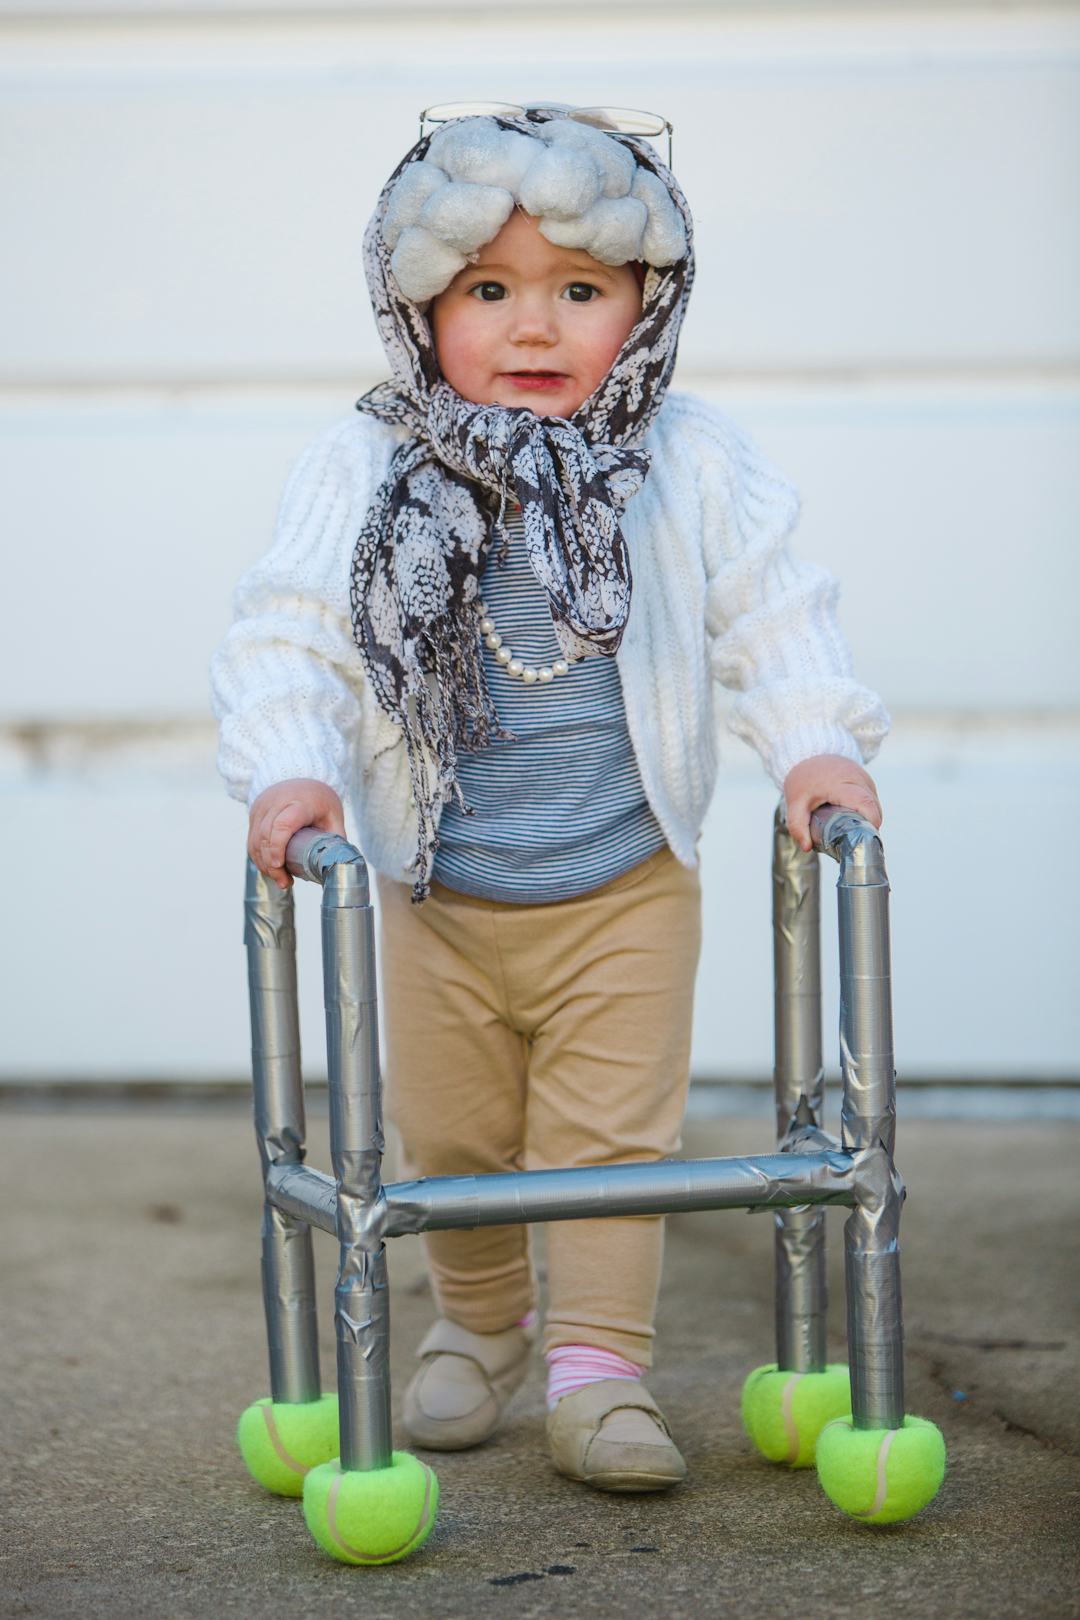 9 Funny Halloween Costumes For Babies Who Have No Idea What's Going On